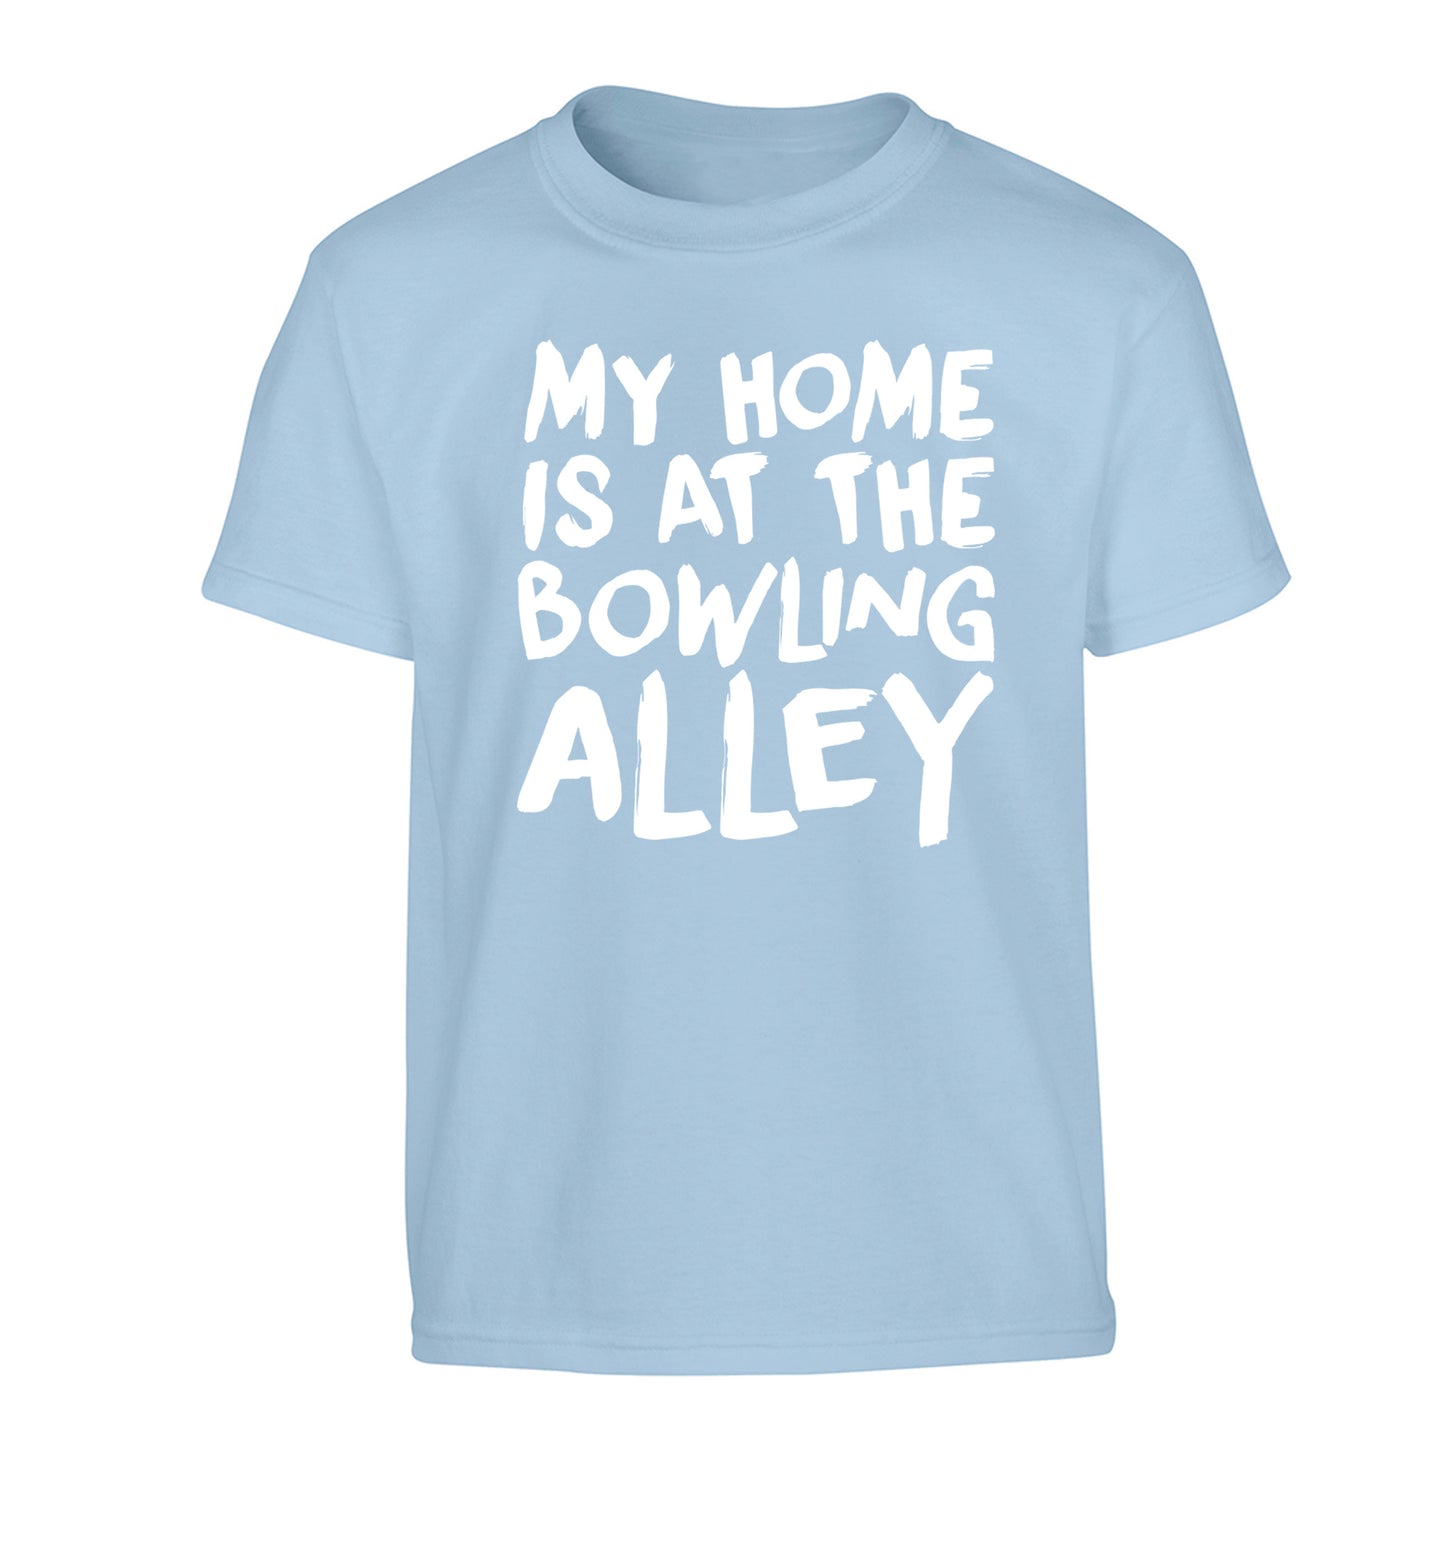 My home is at the bowling alley Children's light blue Tshirt 12-14 Years